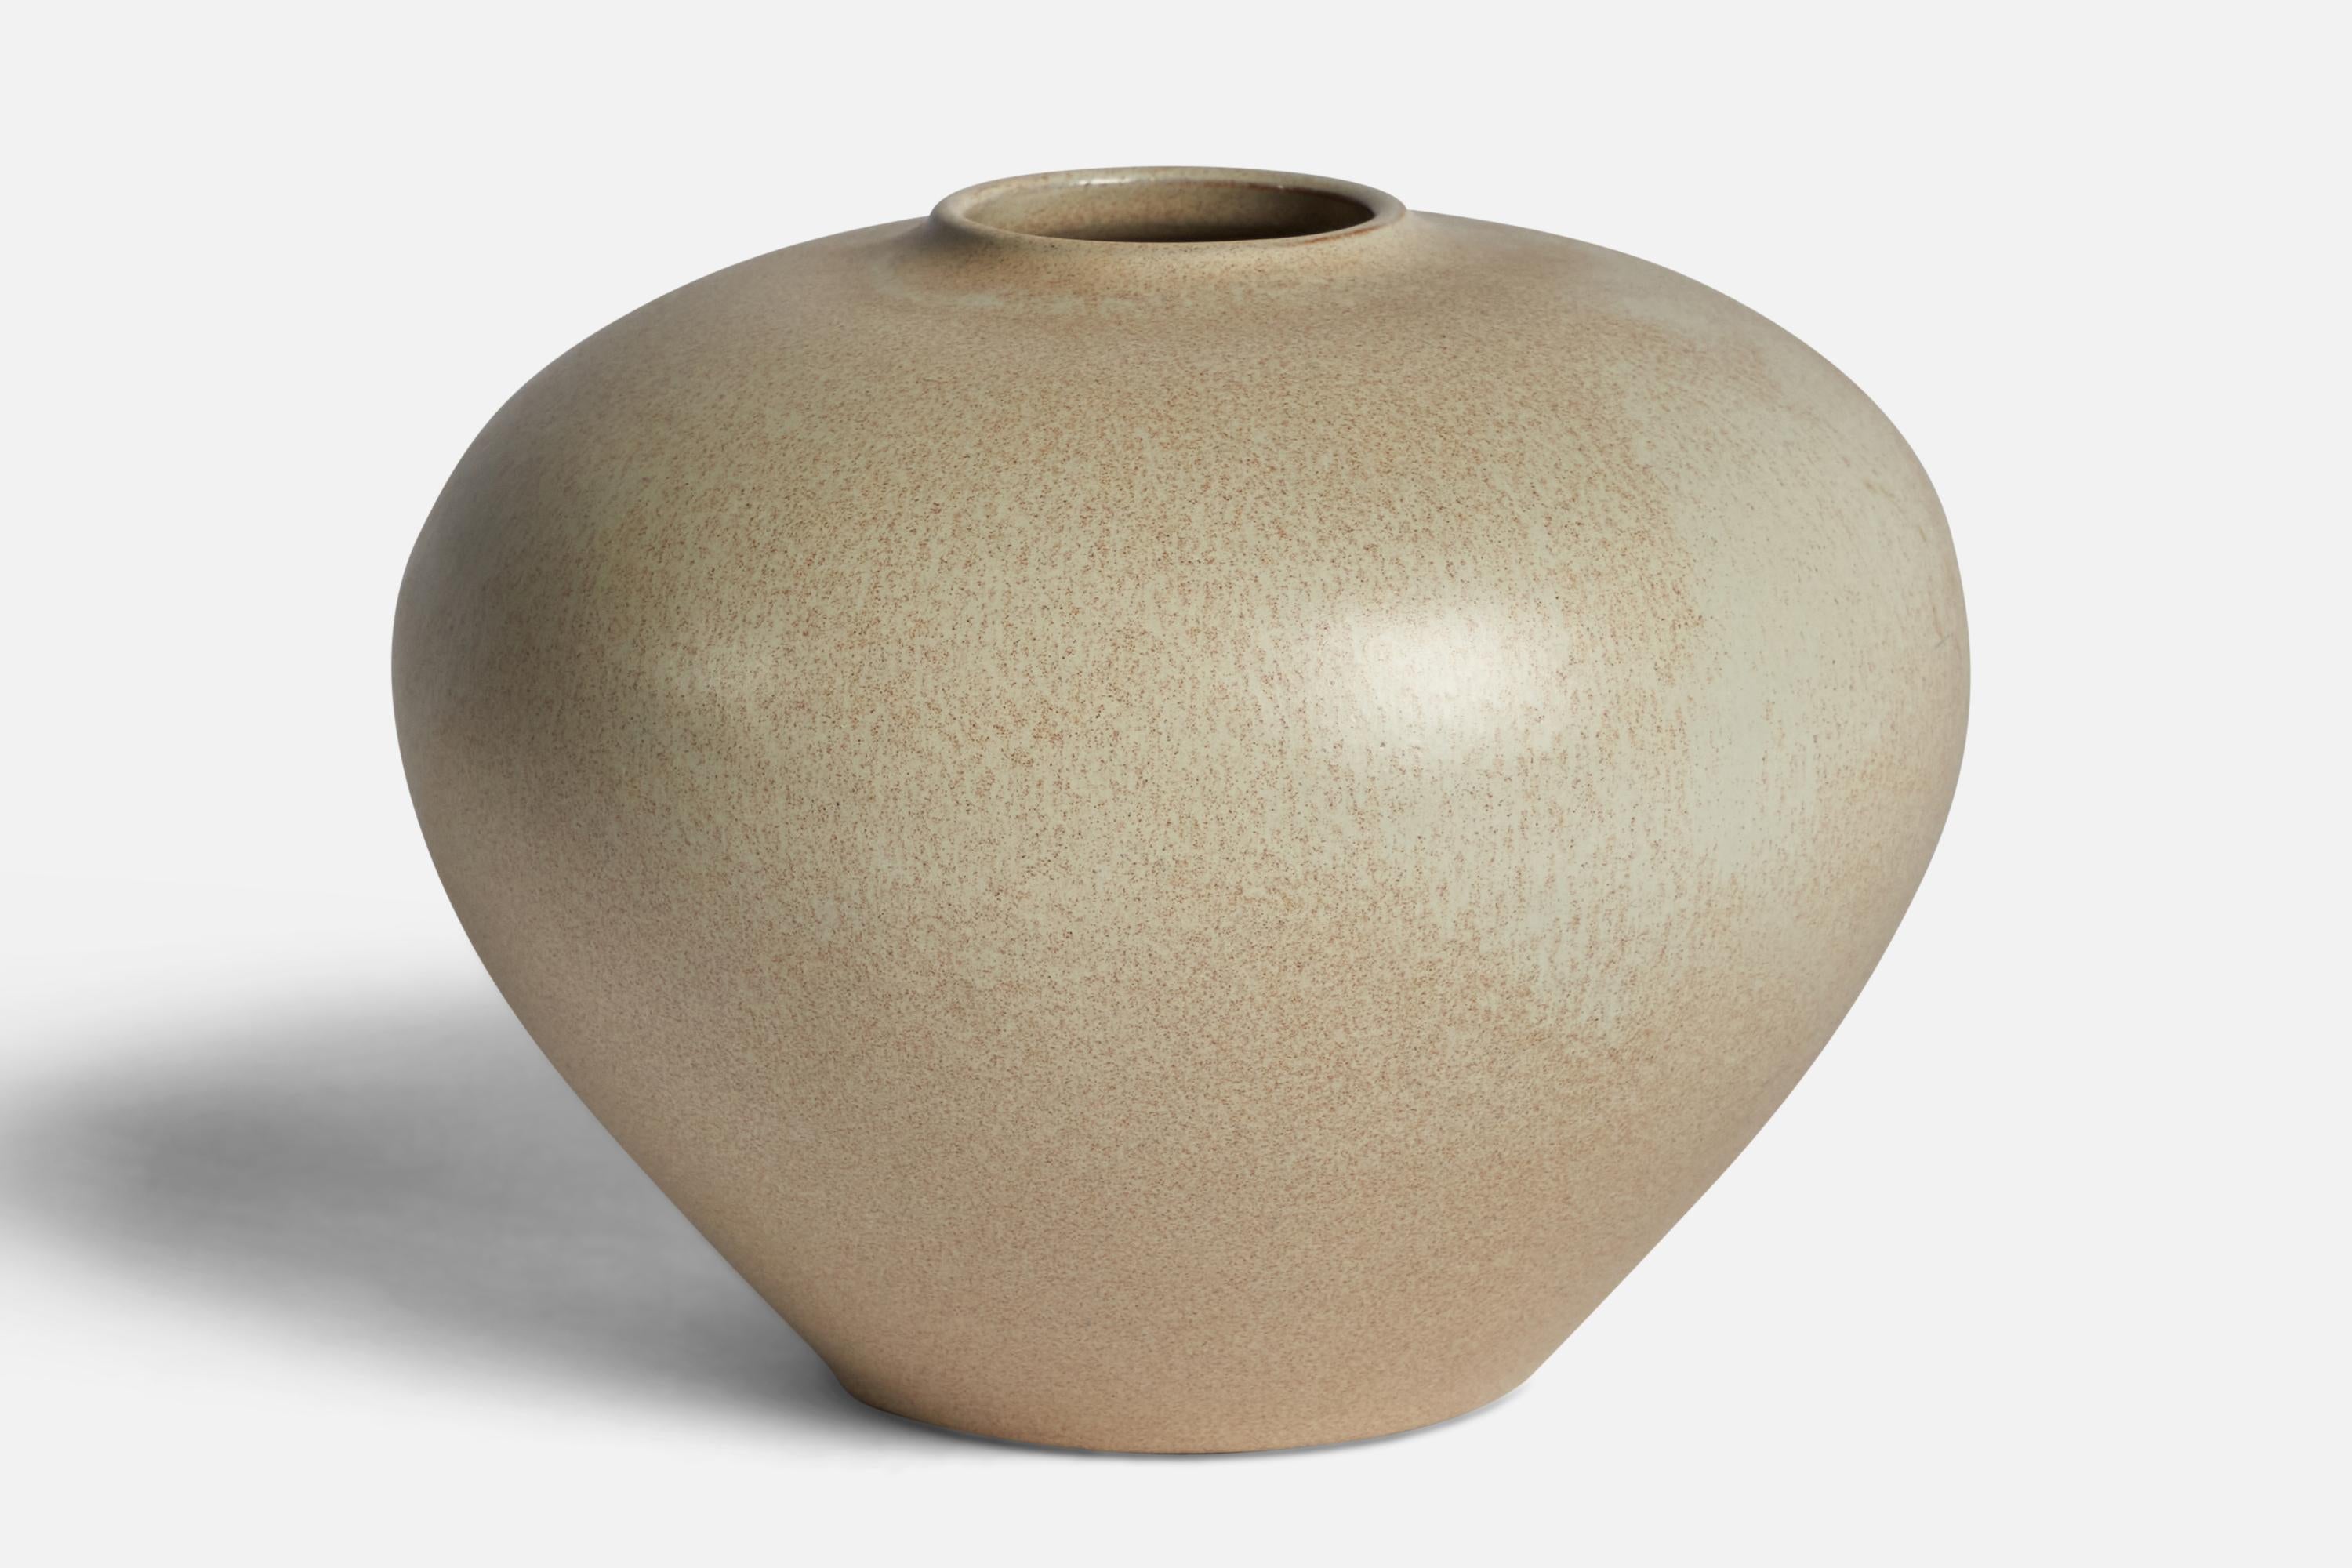 An cream white-glazed earthenware vase designed by Anna-Lisa Thomson and produced by Upsala Ekeby, Sweden, 1930s.